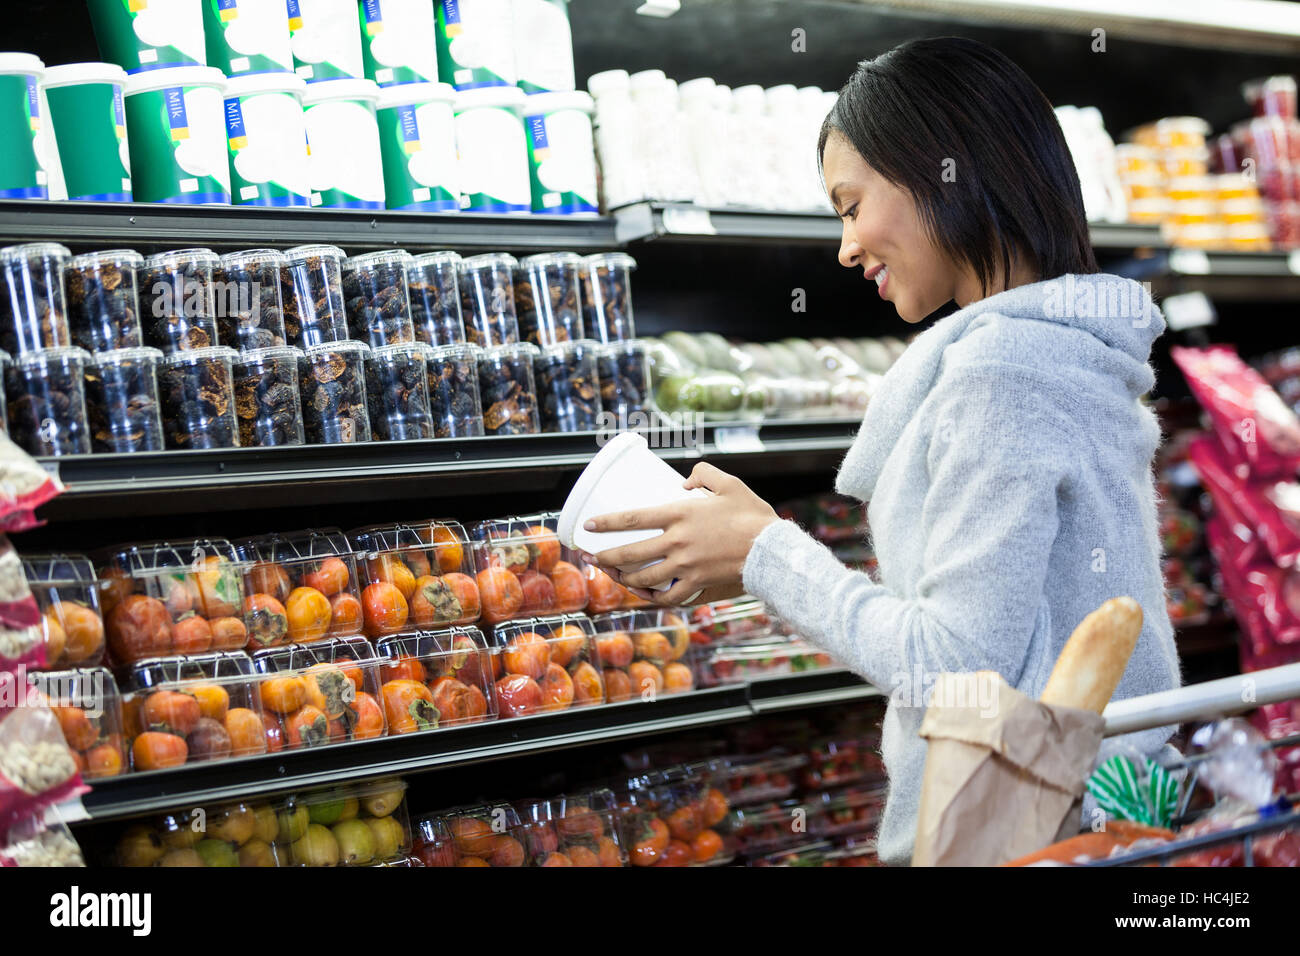 Woman shopping for groceries Stock Photo